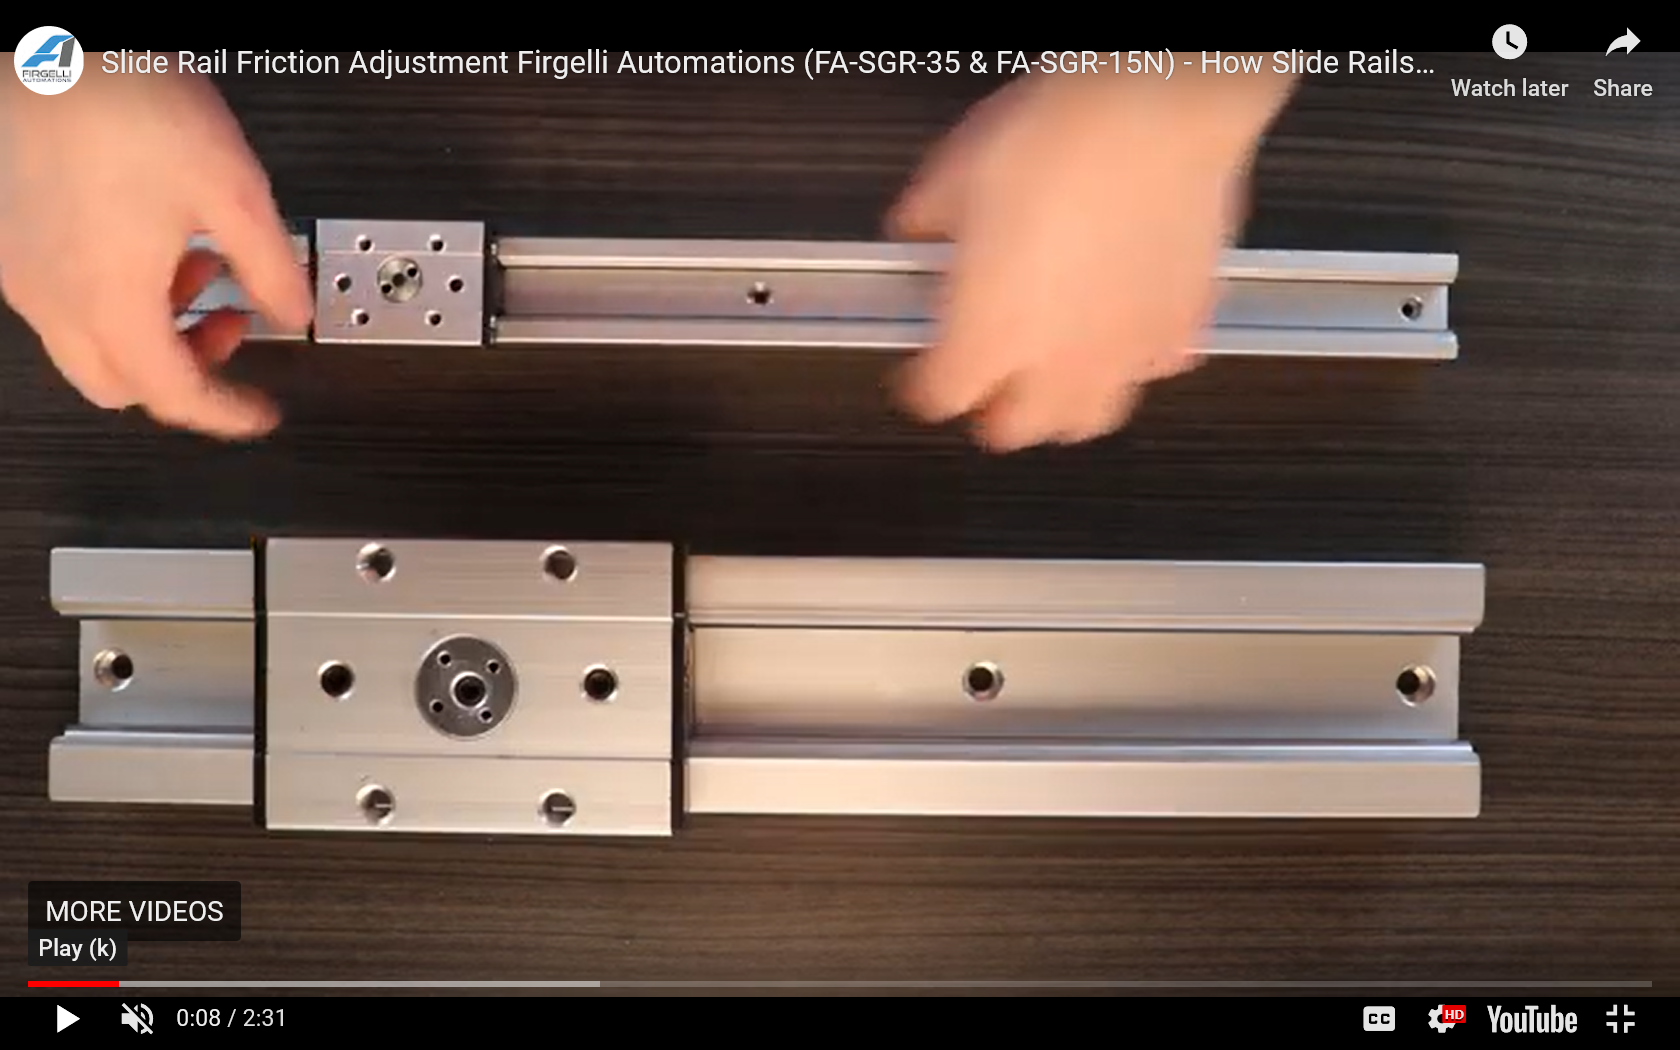 How to adjust friction on slide rails | Firgelli Automations